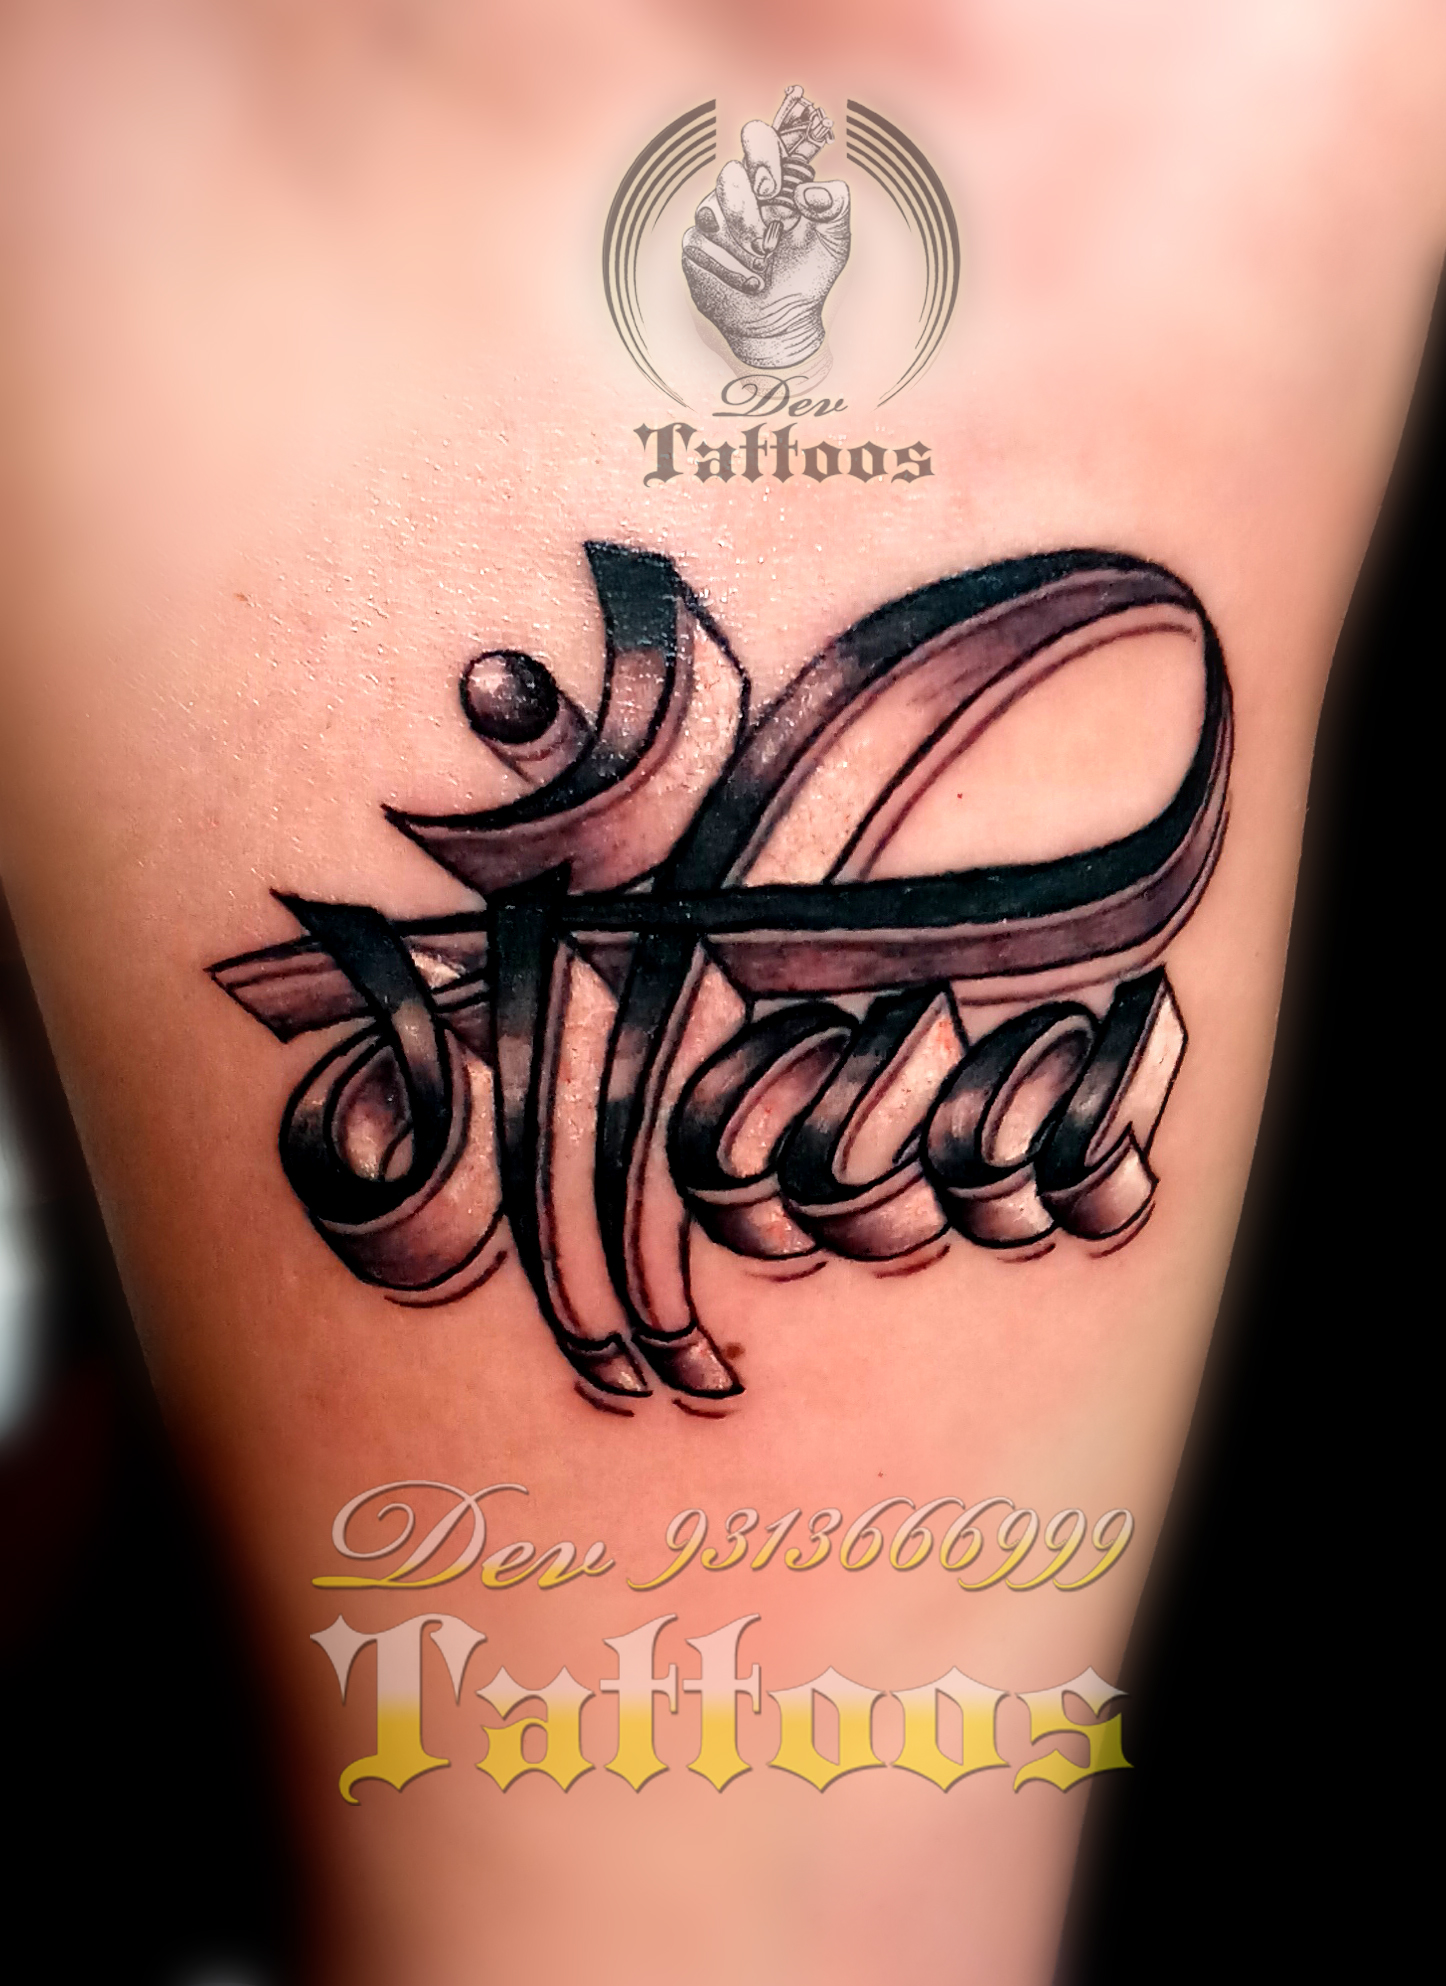 Sonu Name Tattoo Images Best Collection